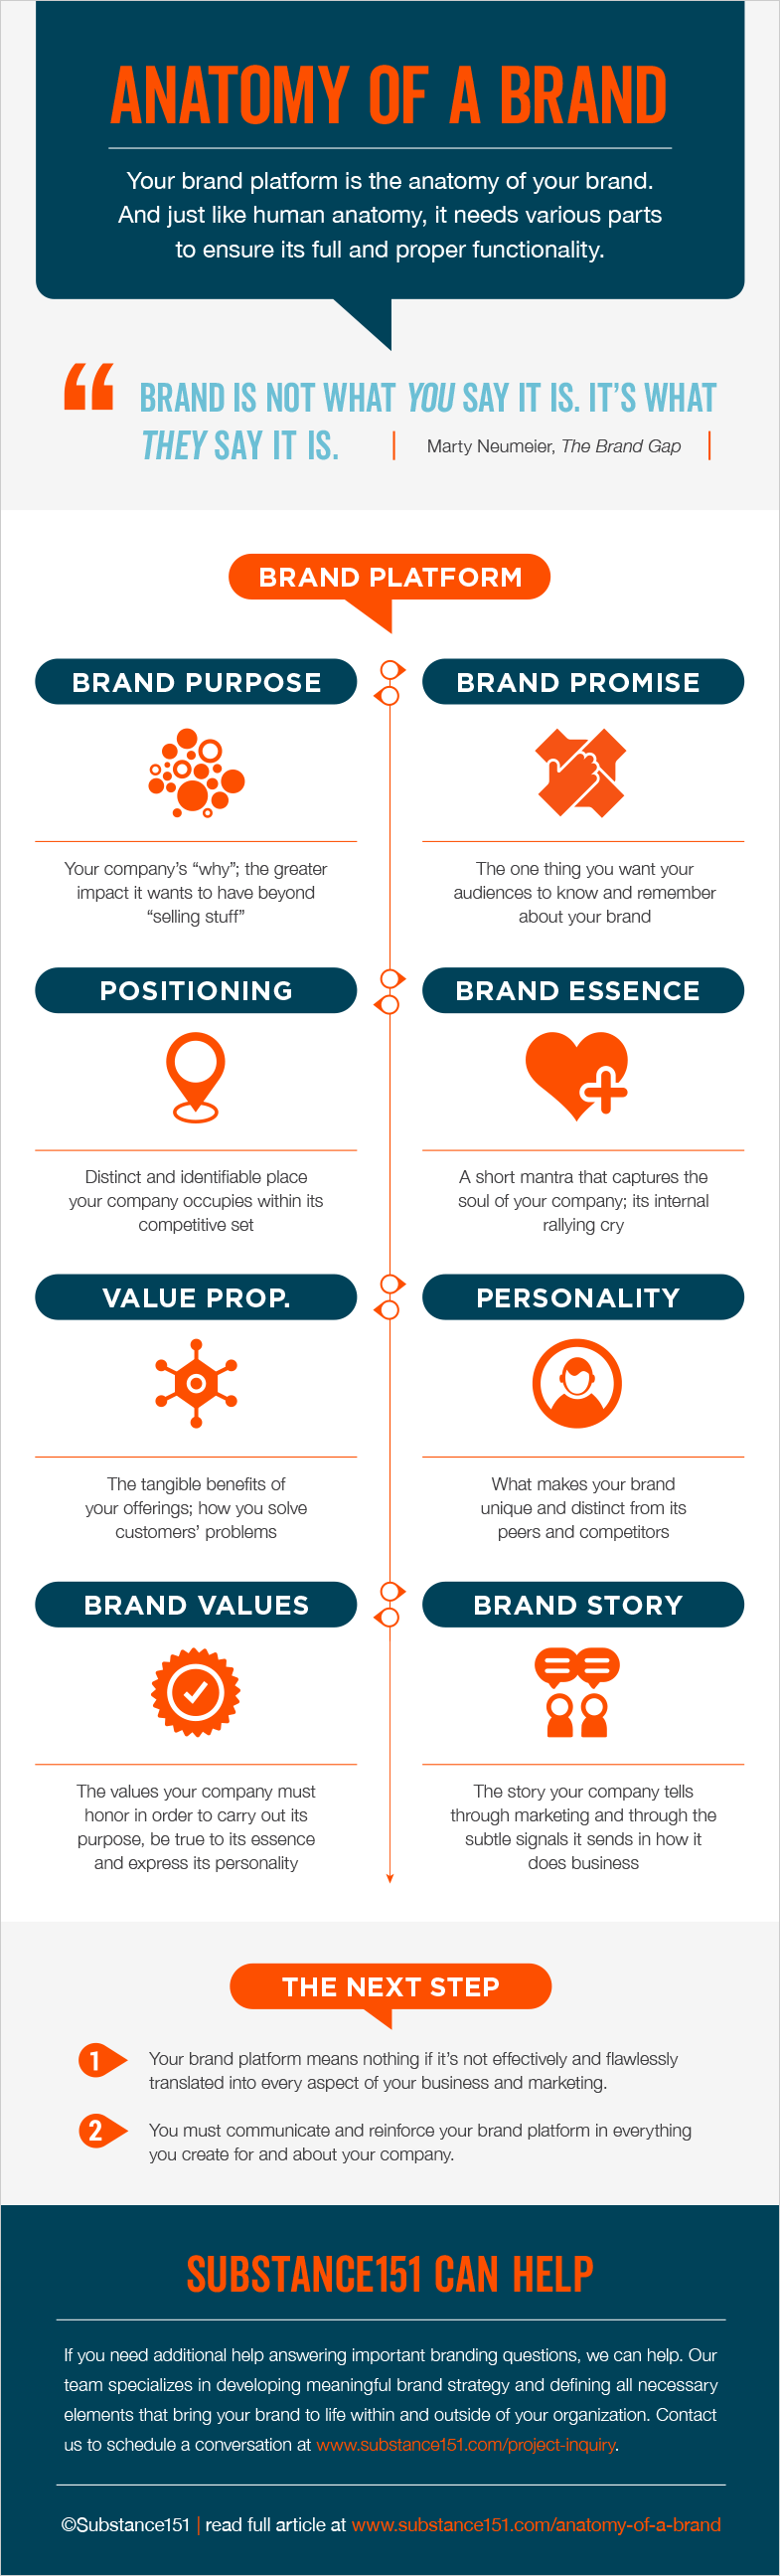 Anatomy of a Brand Infographic